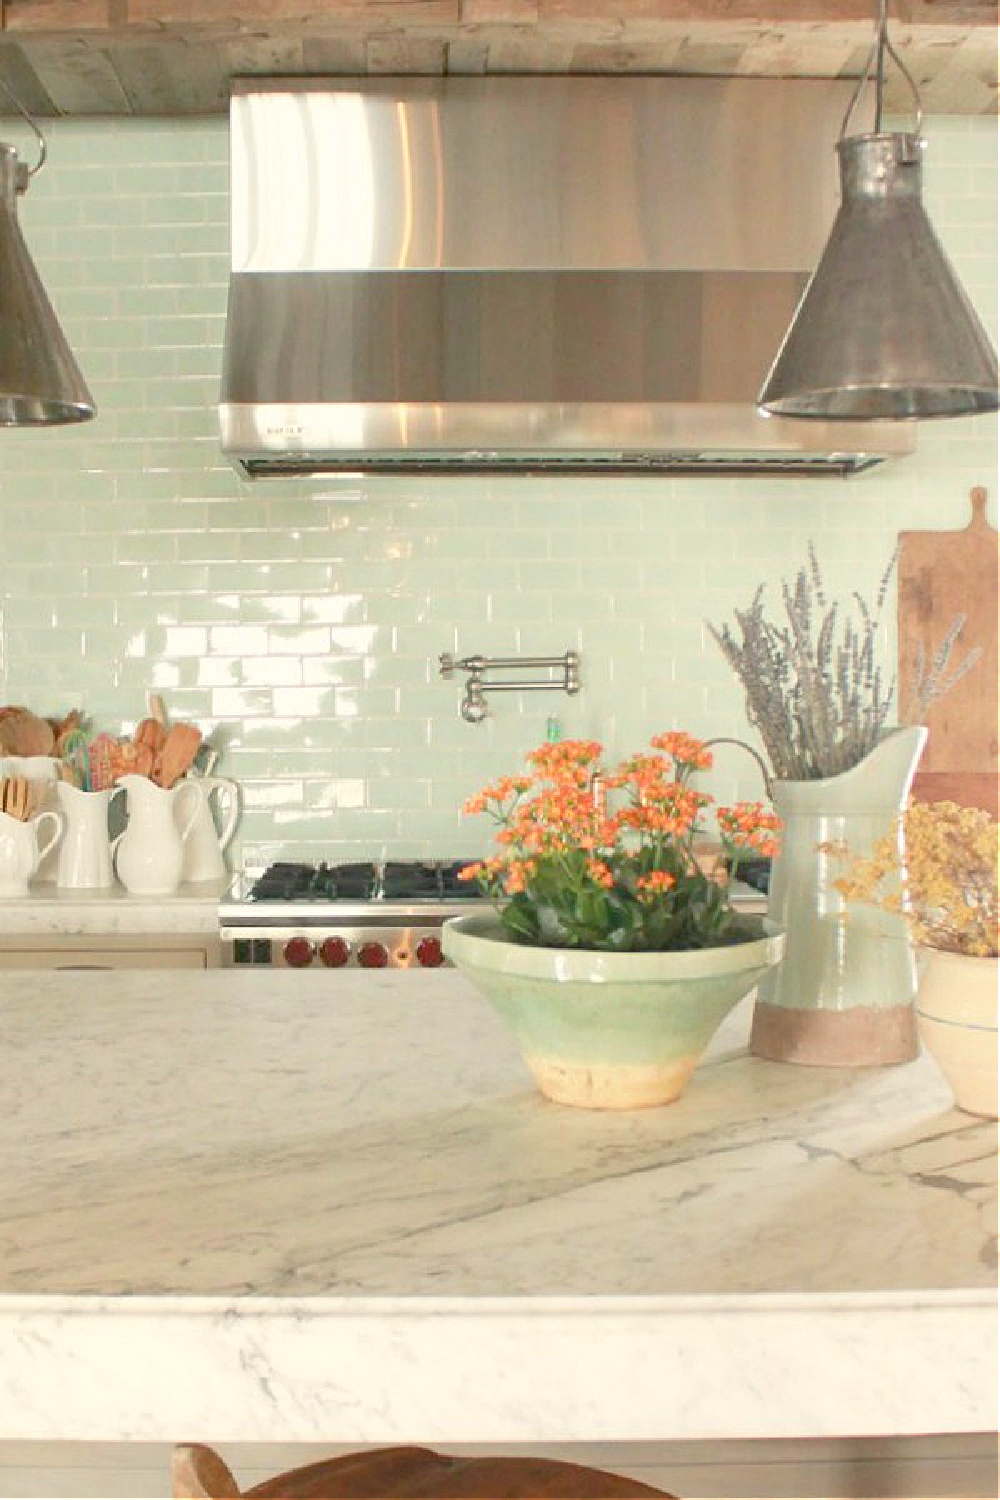 Light green subway tile in kitchen in rustically elegant European country cottage - Desiree of Beljar Home and DecordeProvence. #europeancountry #cottagestyleinteriors